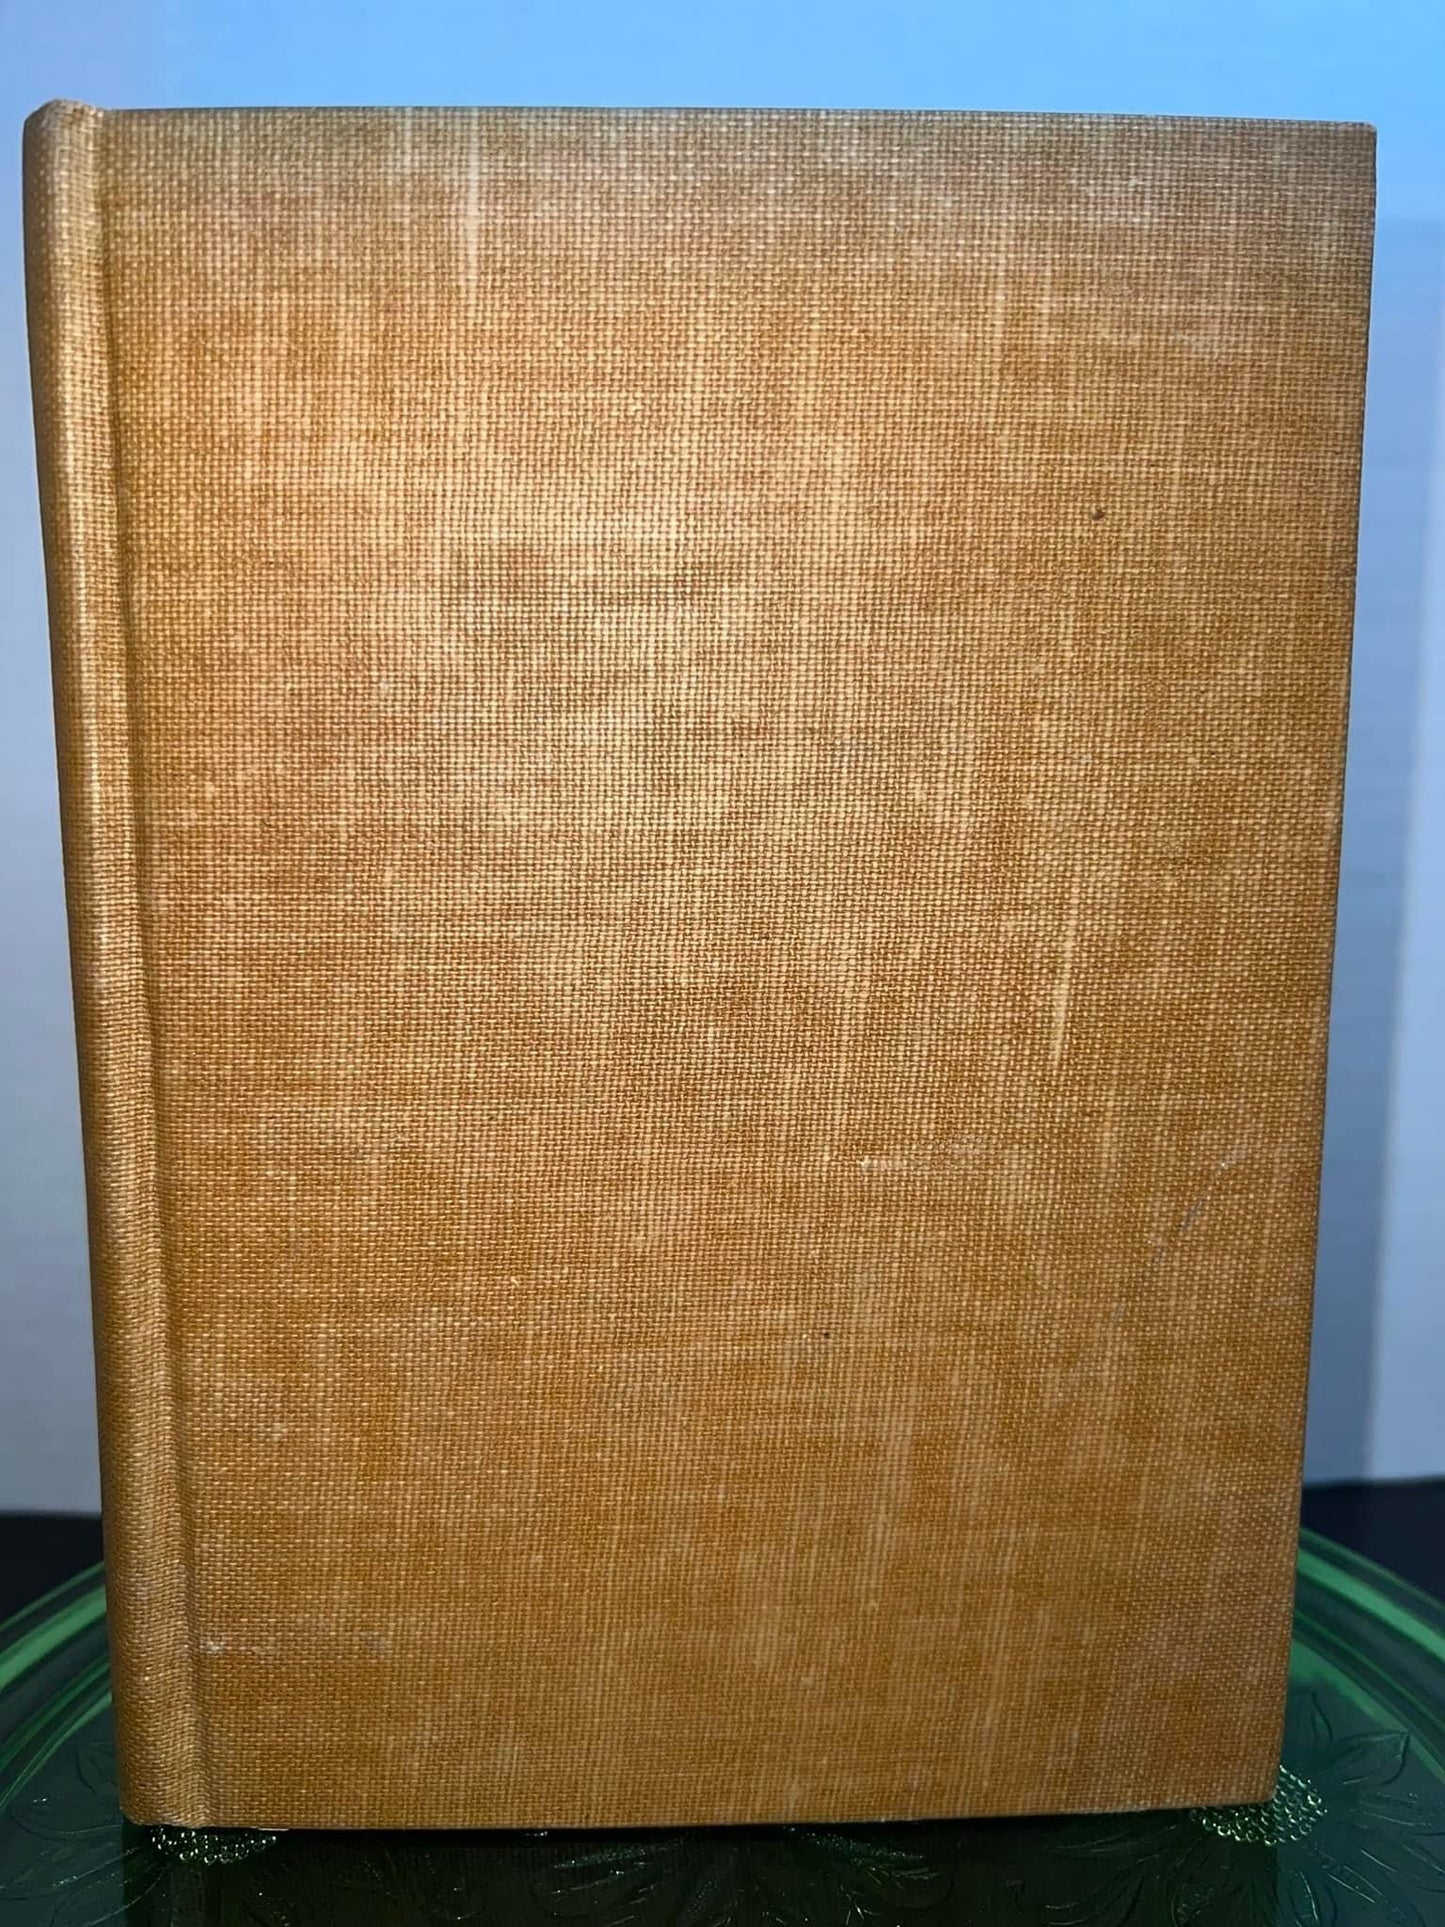 Vintage military 1946

March to Quebec - journals of the members of Arnold’s expedition

Kenneth roberts